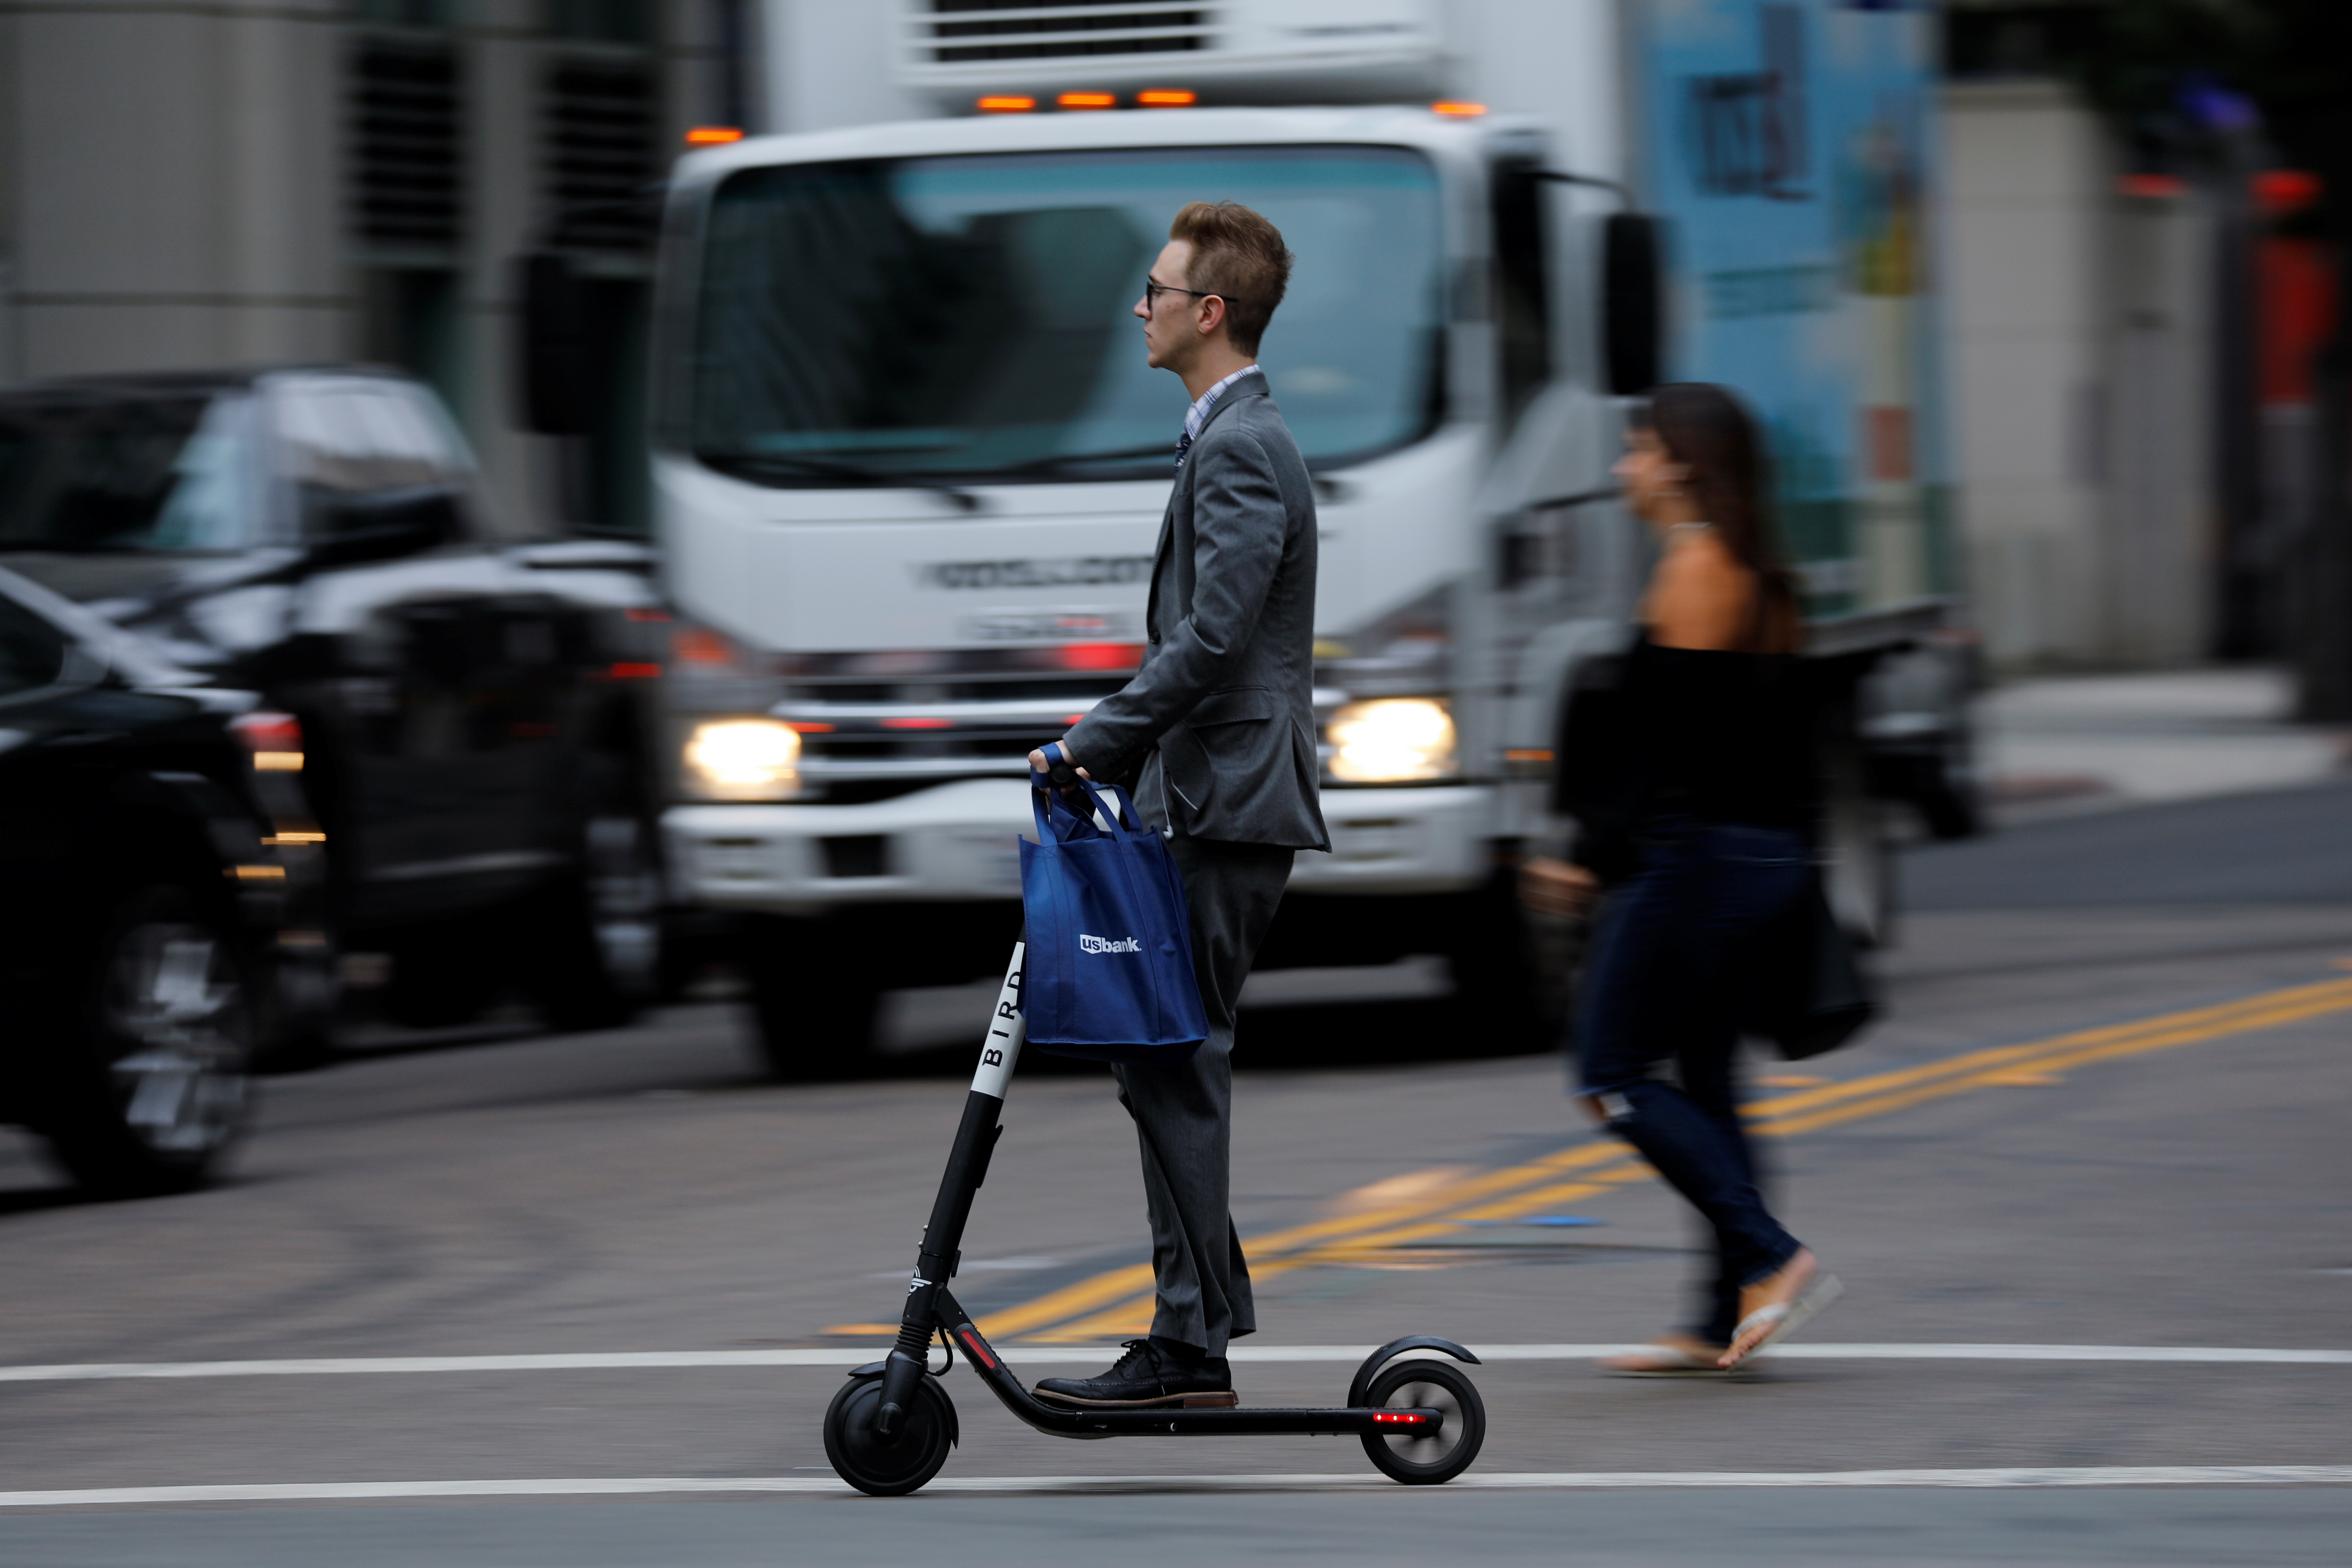 A man in a suit rides an electric BIRD rental scooter along a city street in San Diego, California